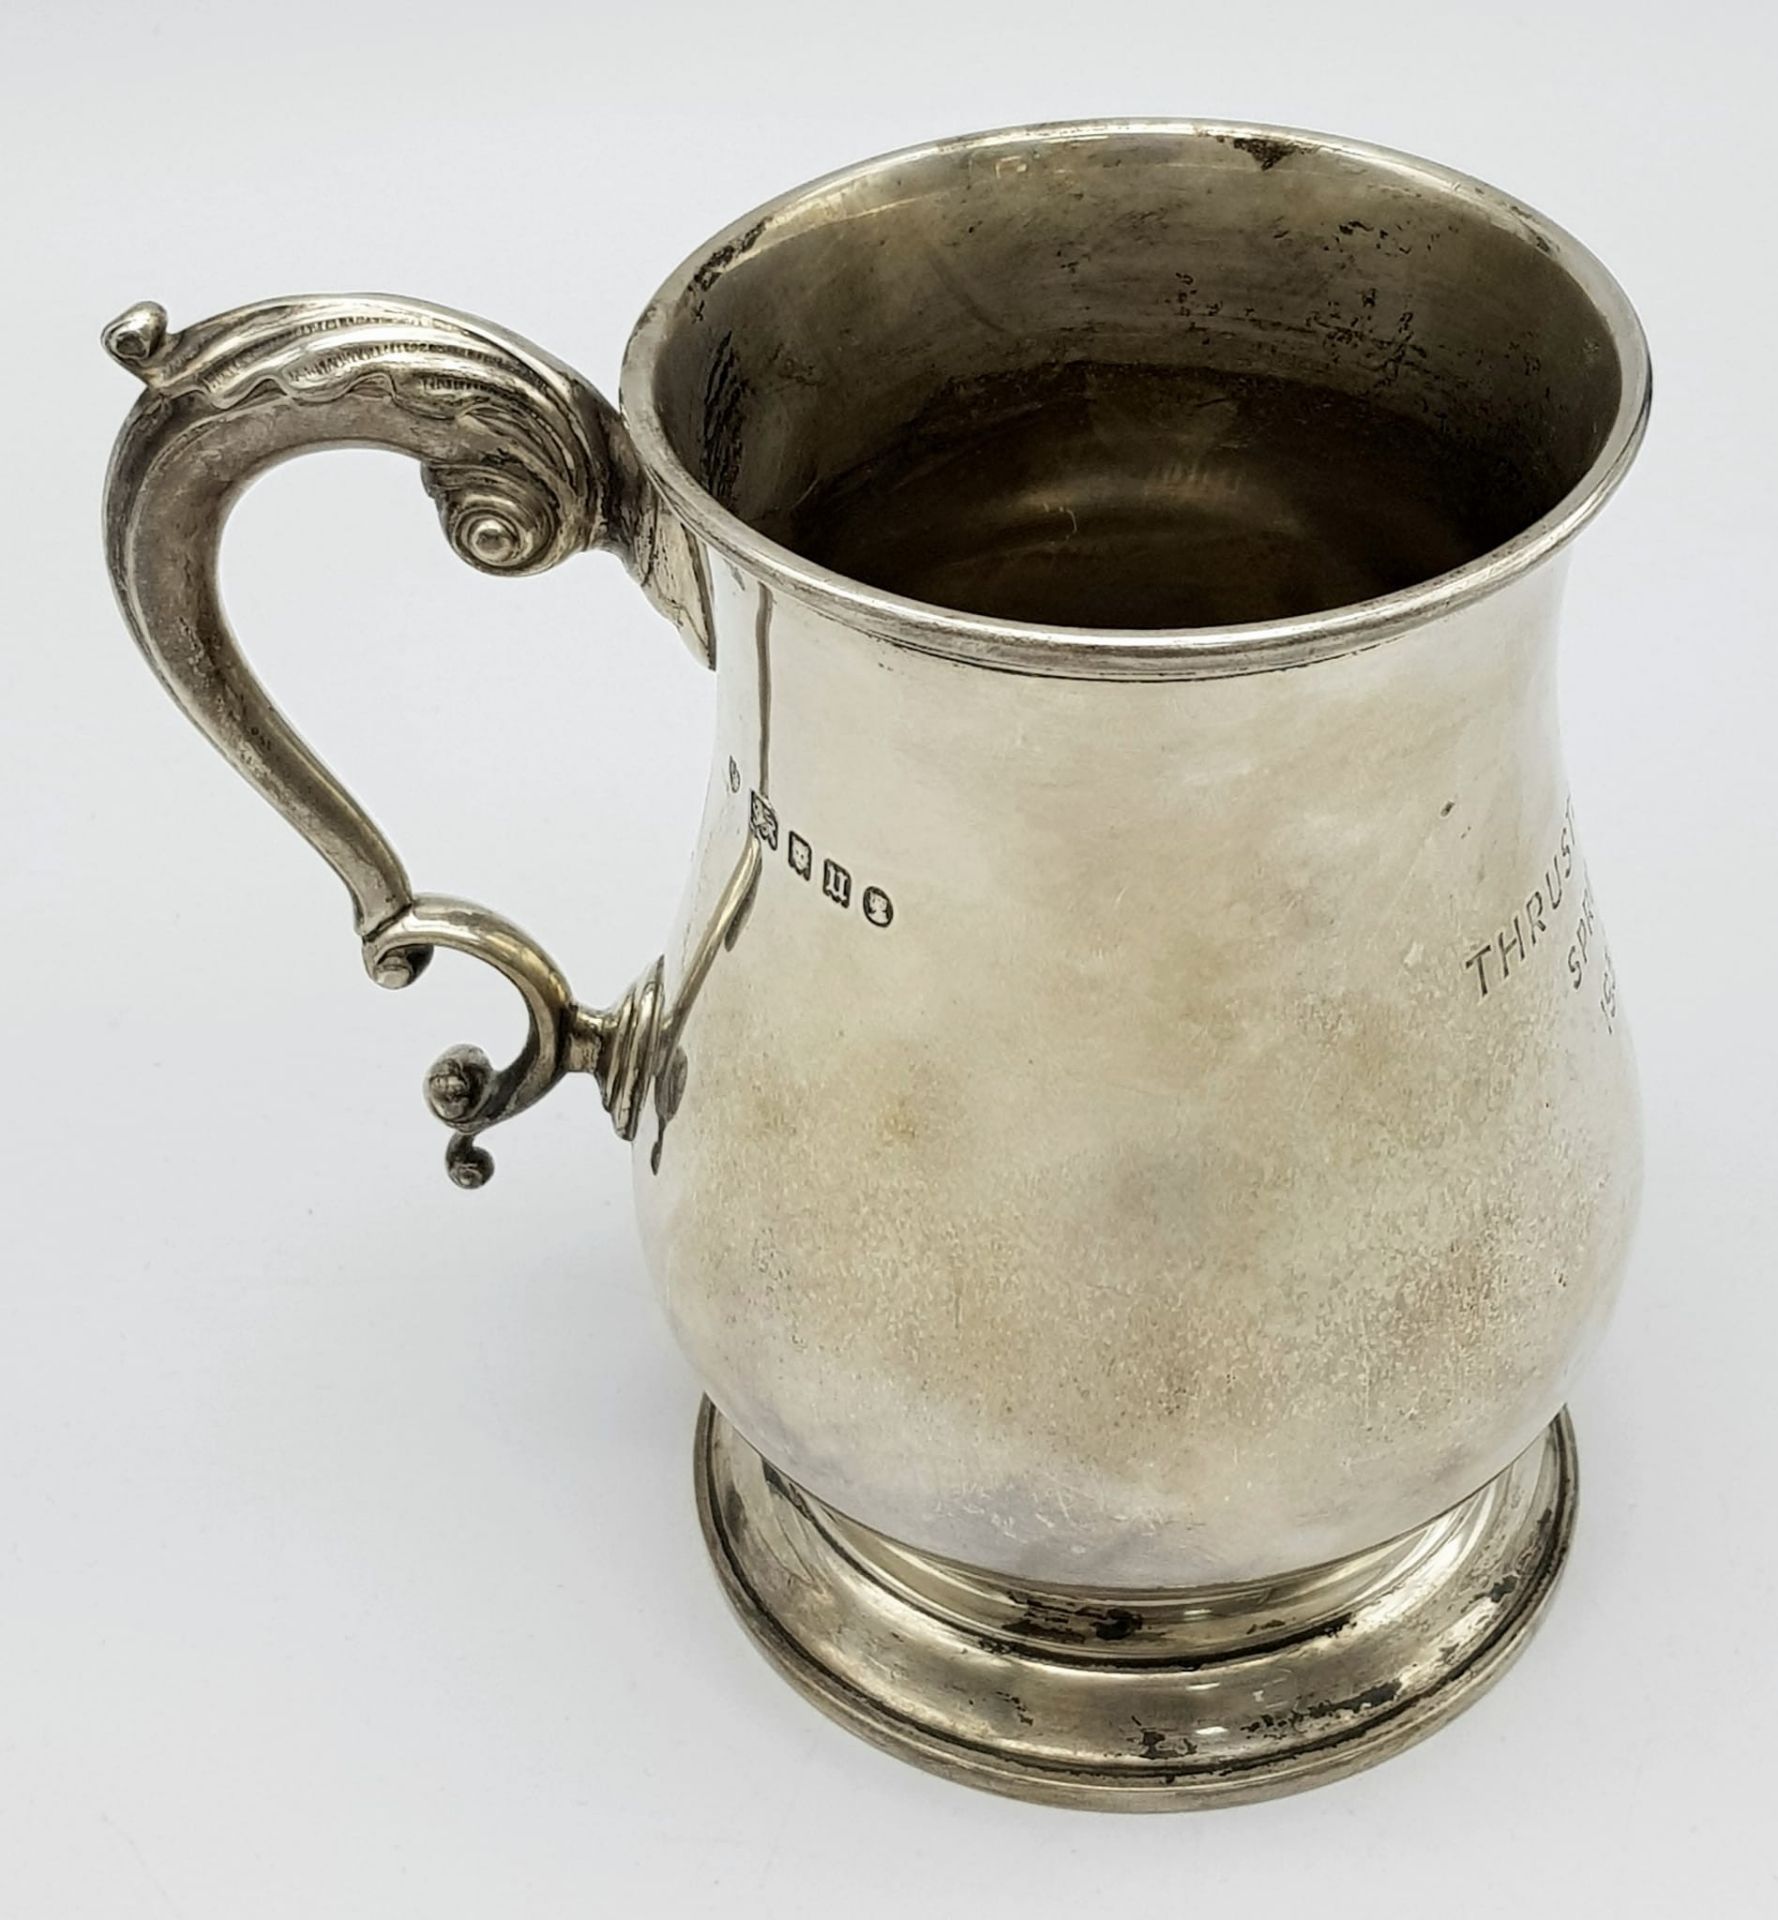 A Sterling Silver Tankard Given to the Thrusters! Hourglass design with an ornate handle.